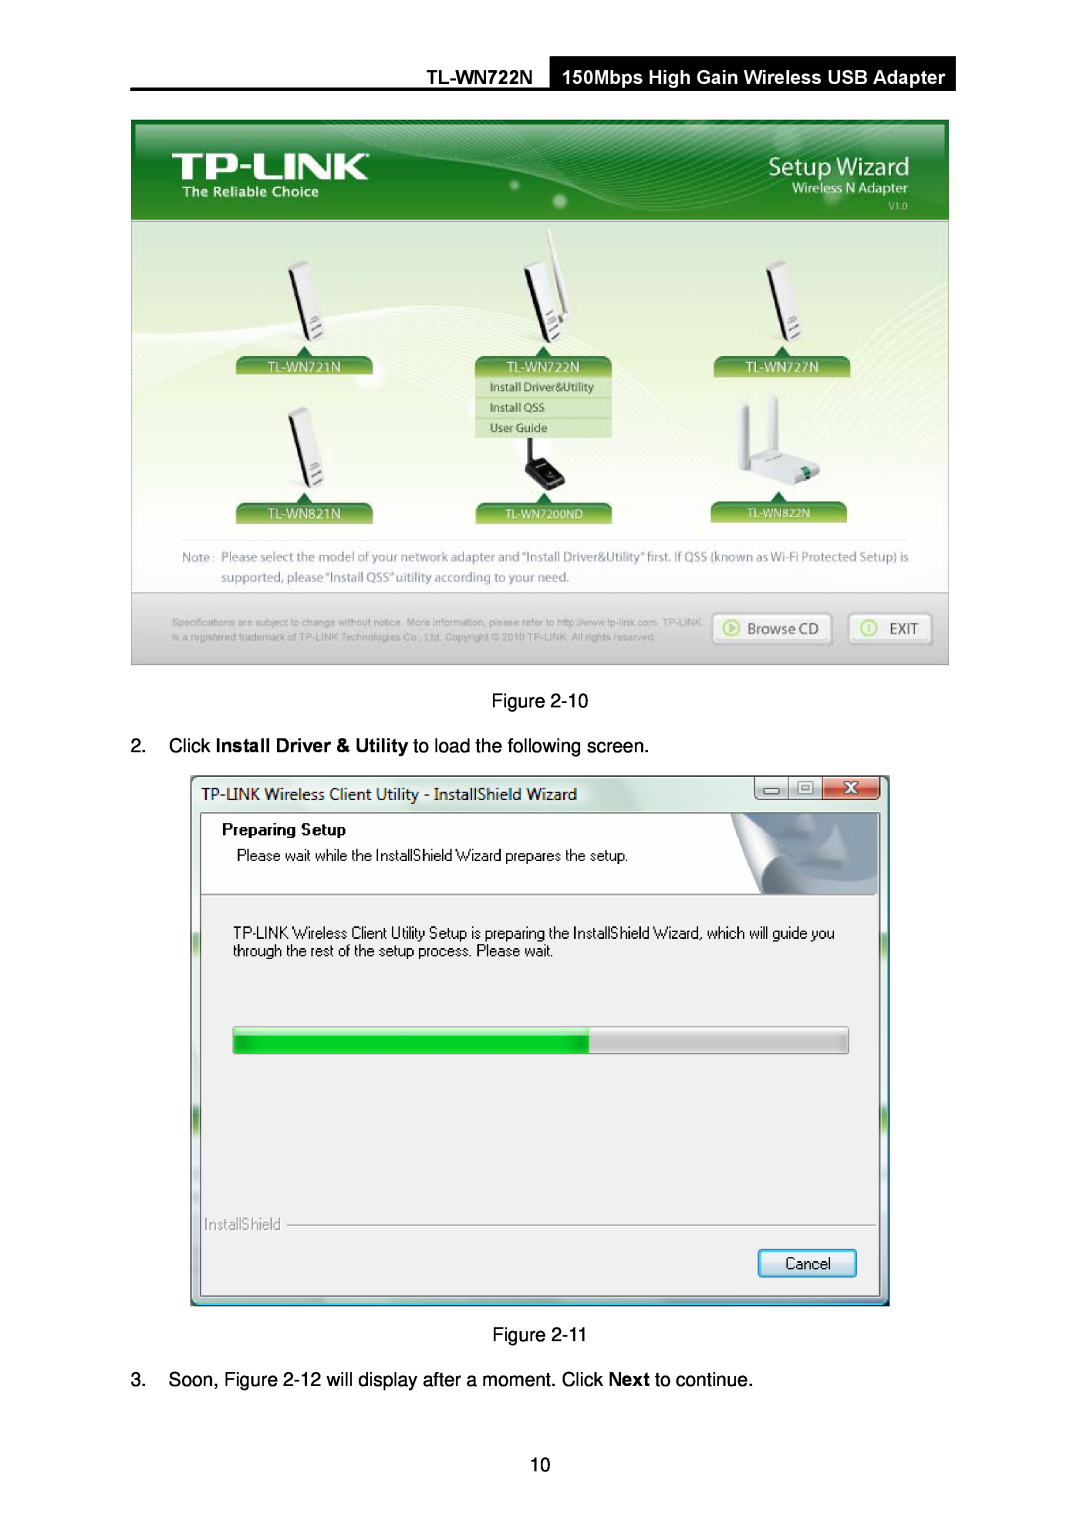 TP-Link TL-WN722N 150Mbps High Gain Wireless USB Adapter, Click Install Driver & Utility to load the following screen 